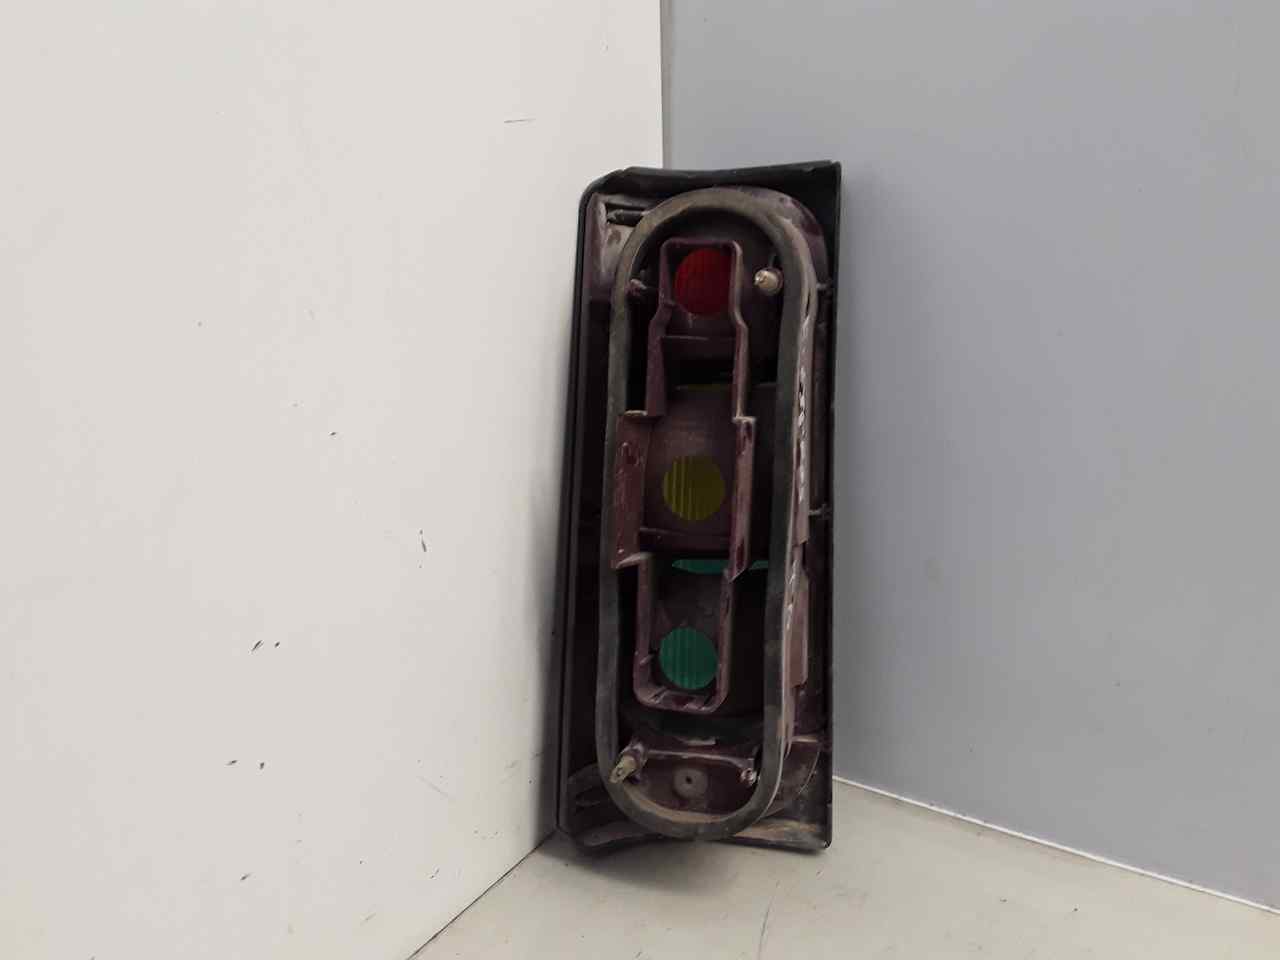 RENAULT Express Rear Right Taillight Lamp 600103013 25089215